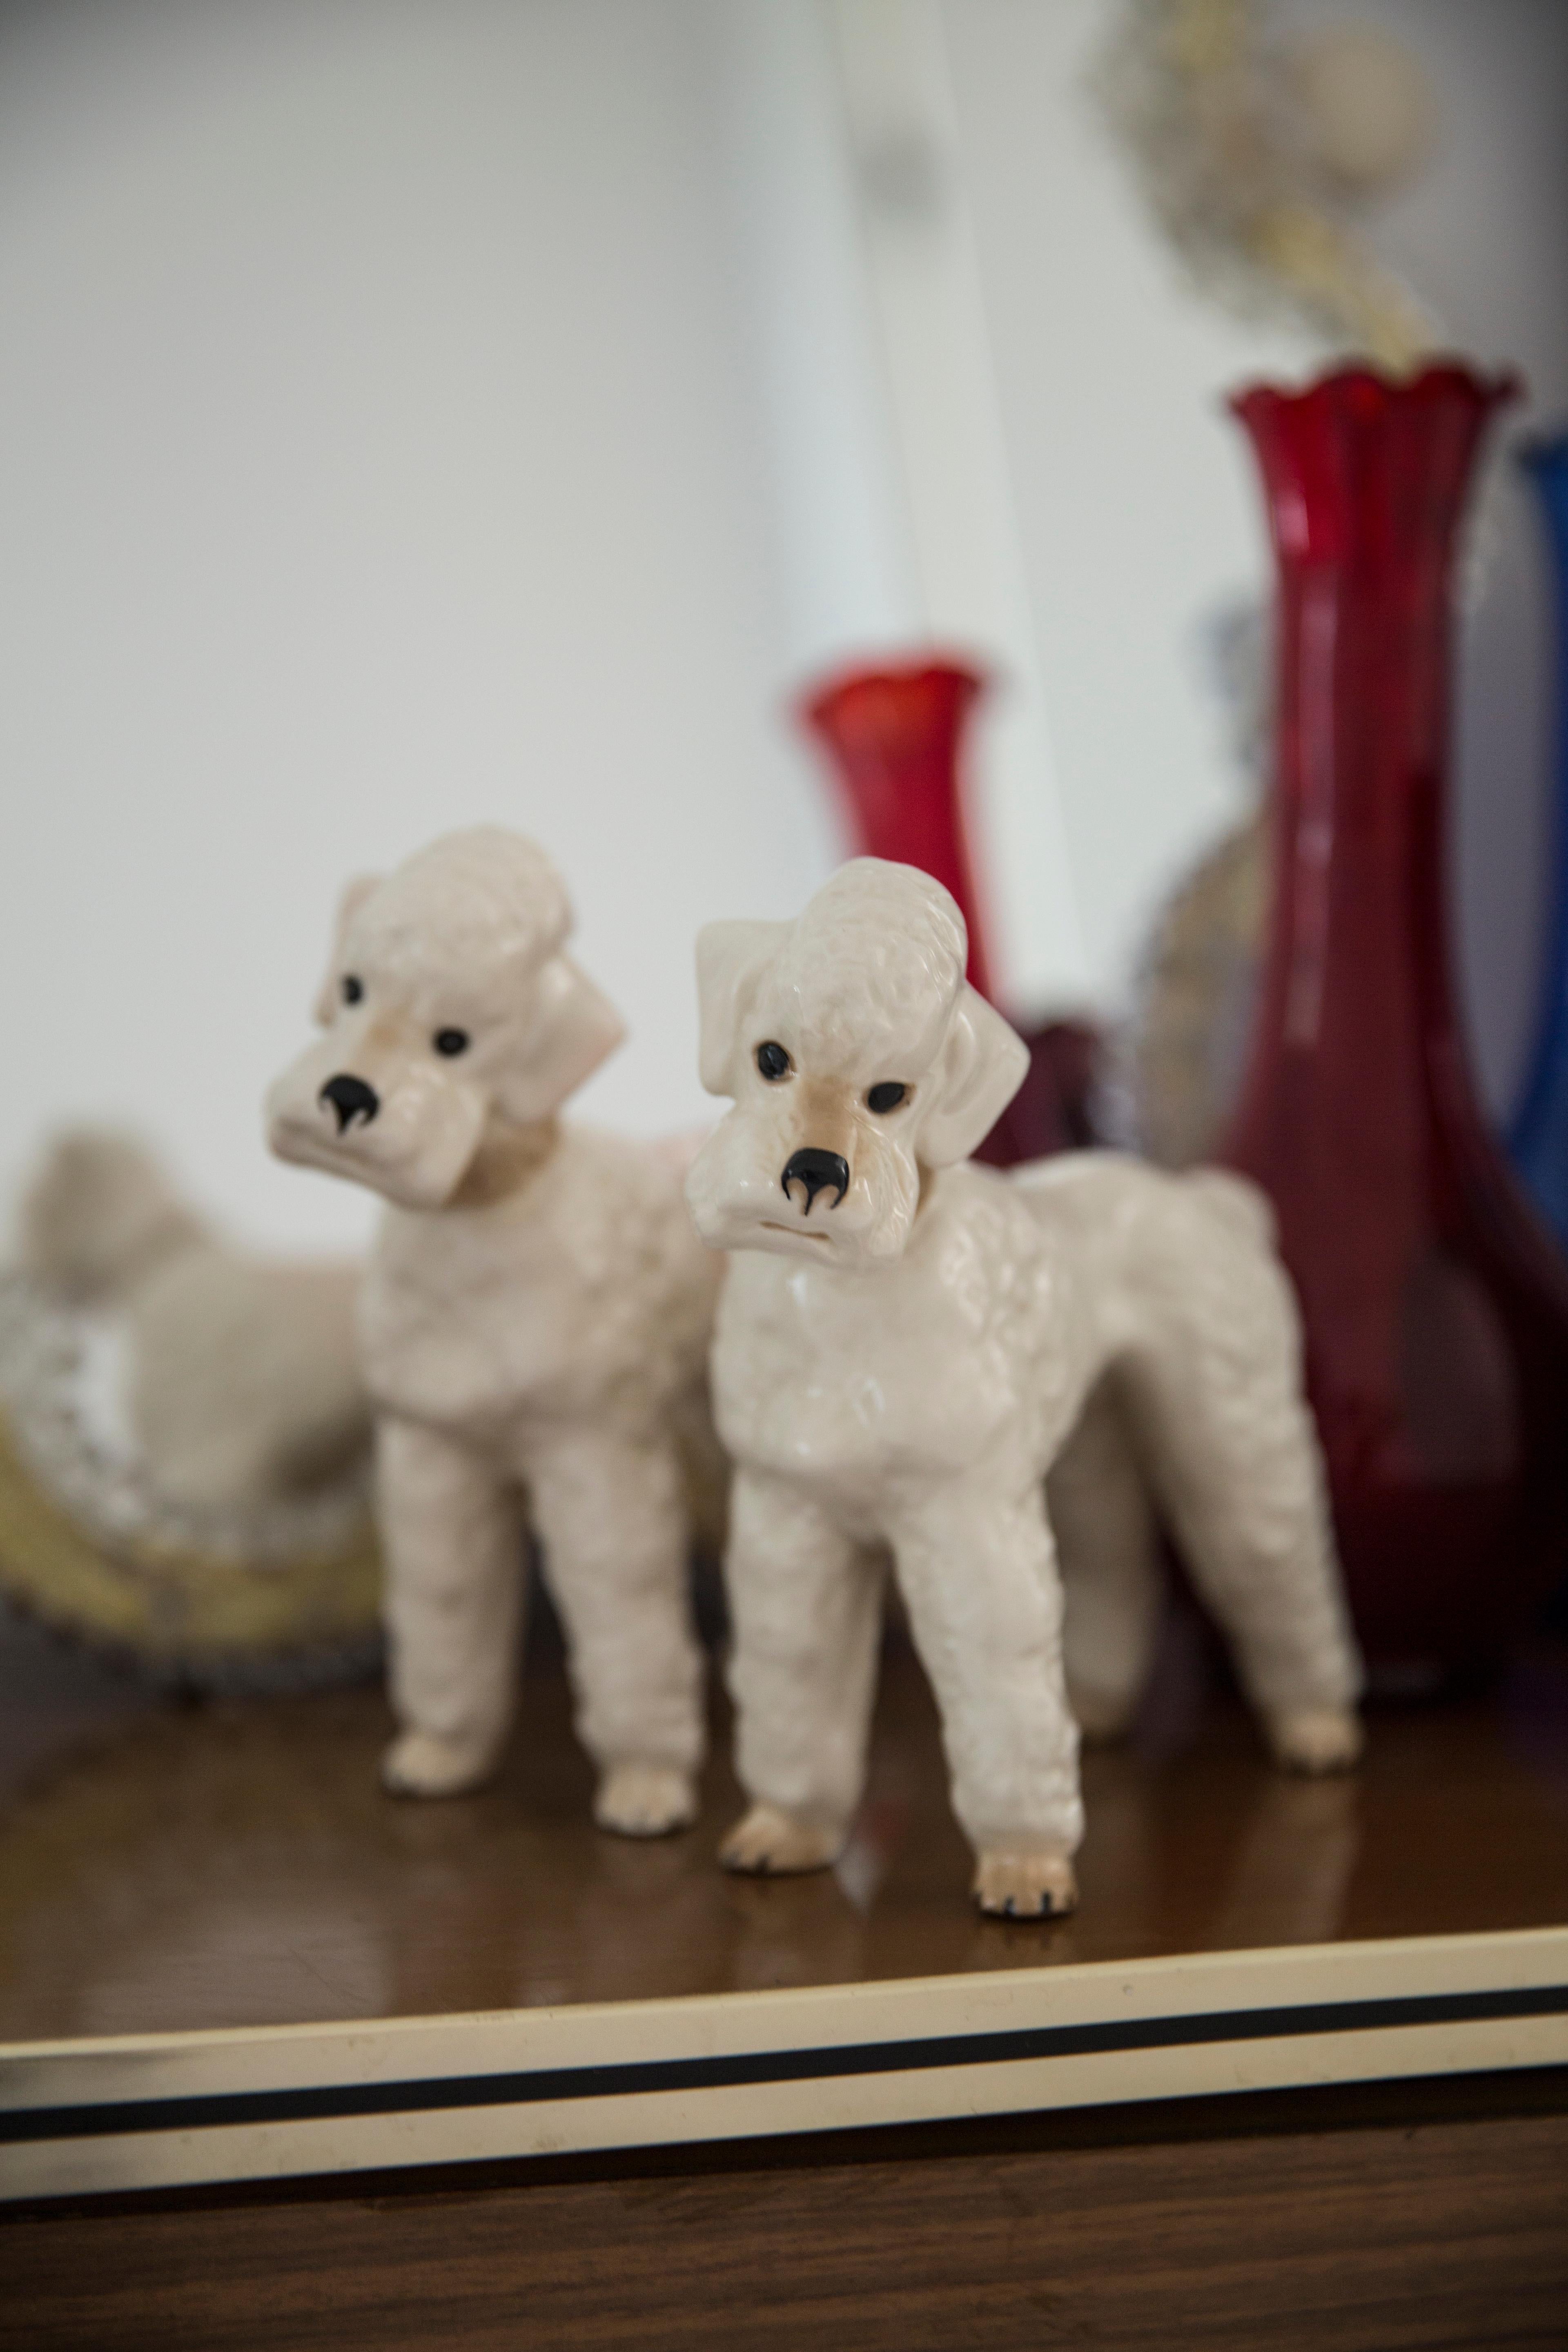 Painted ceramic, very good original vintage condition. No damages or cracks. Beautiful and unique decorative sculpture. White Poodle Dog Sculpture was produced in Italy. Only one dog available.